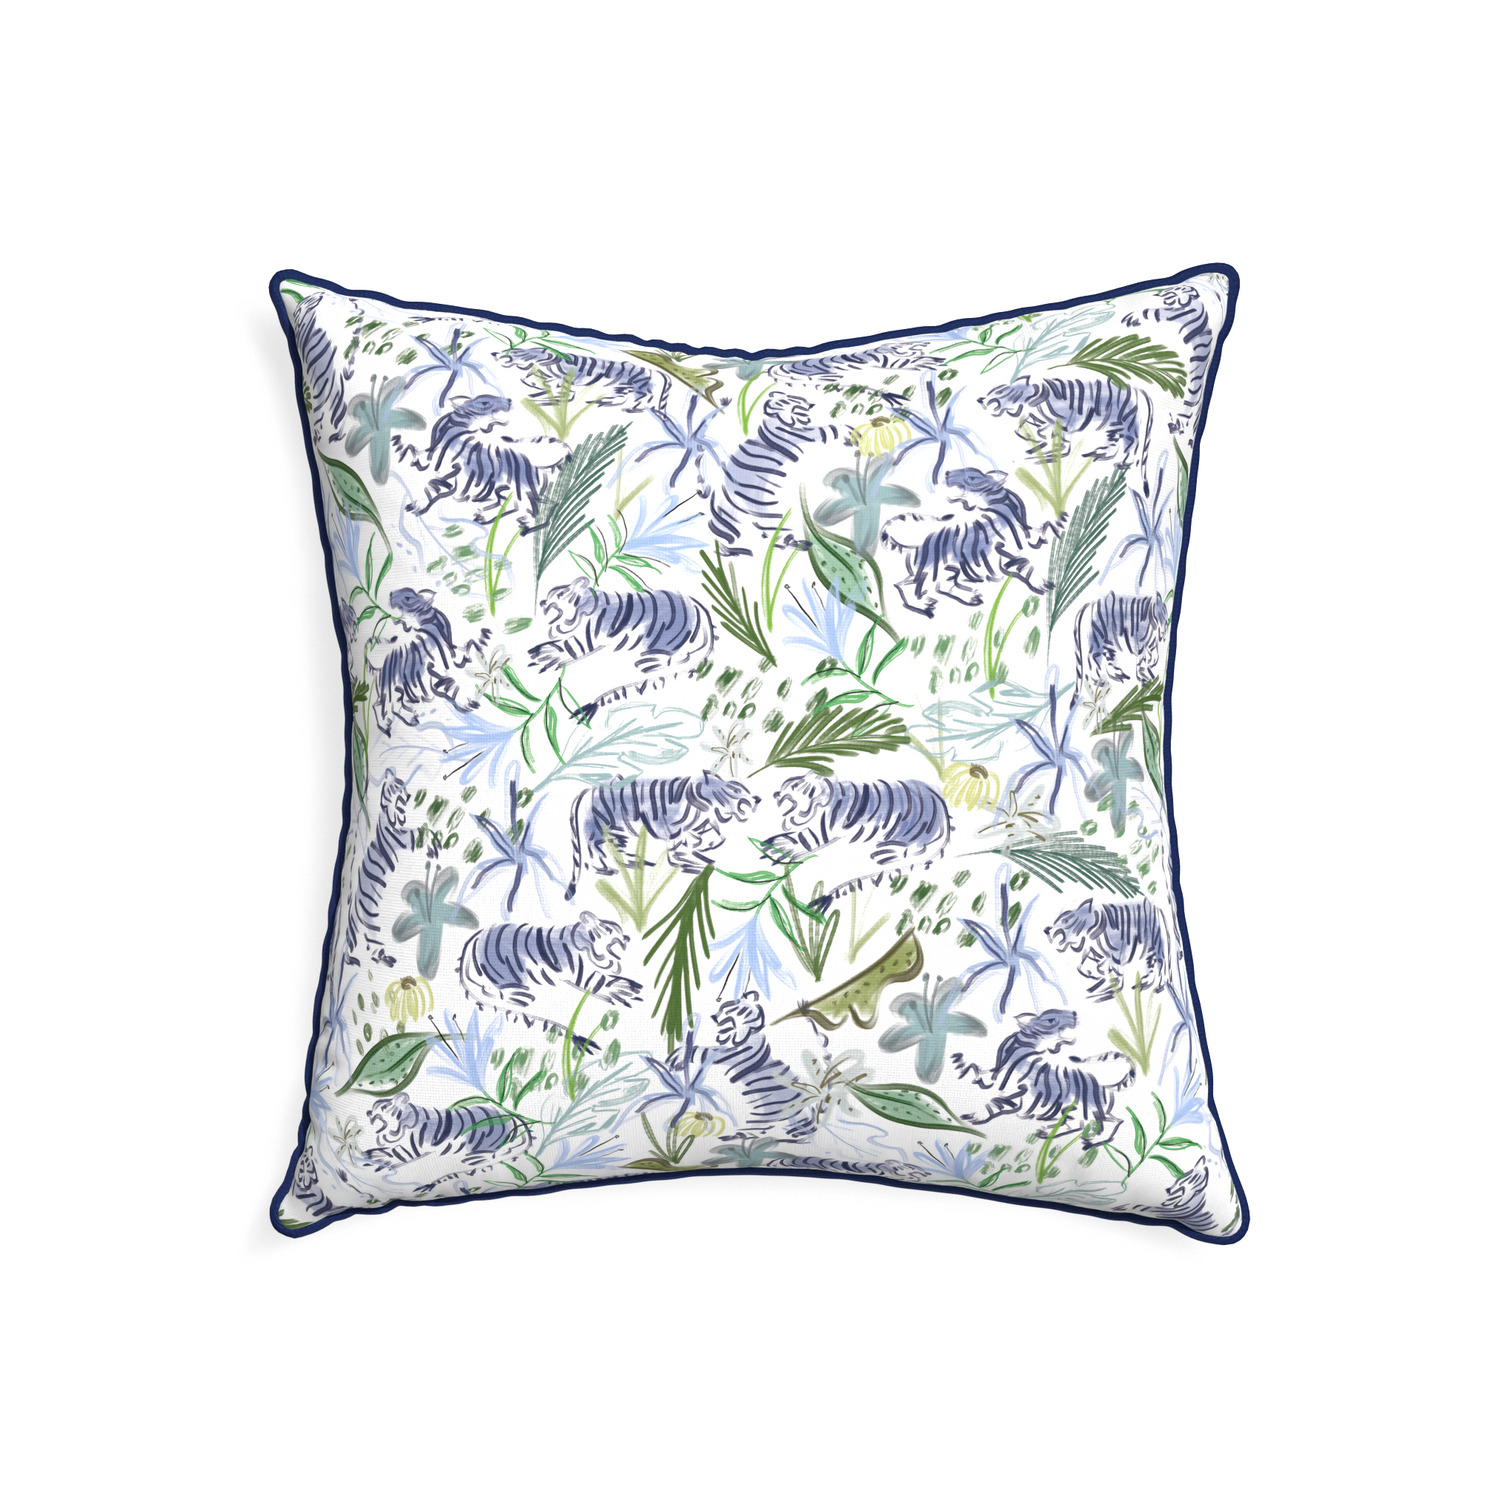 22-square frida green custom pillow with midnight piping on white background